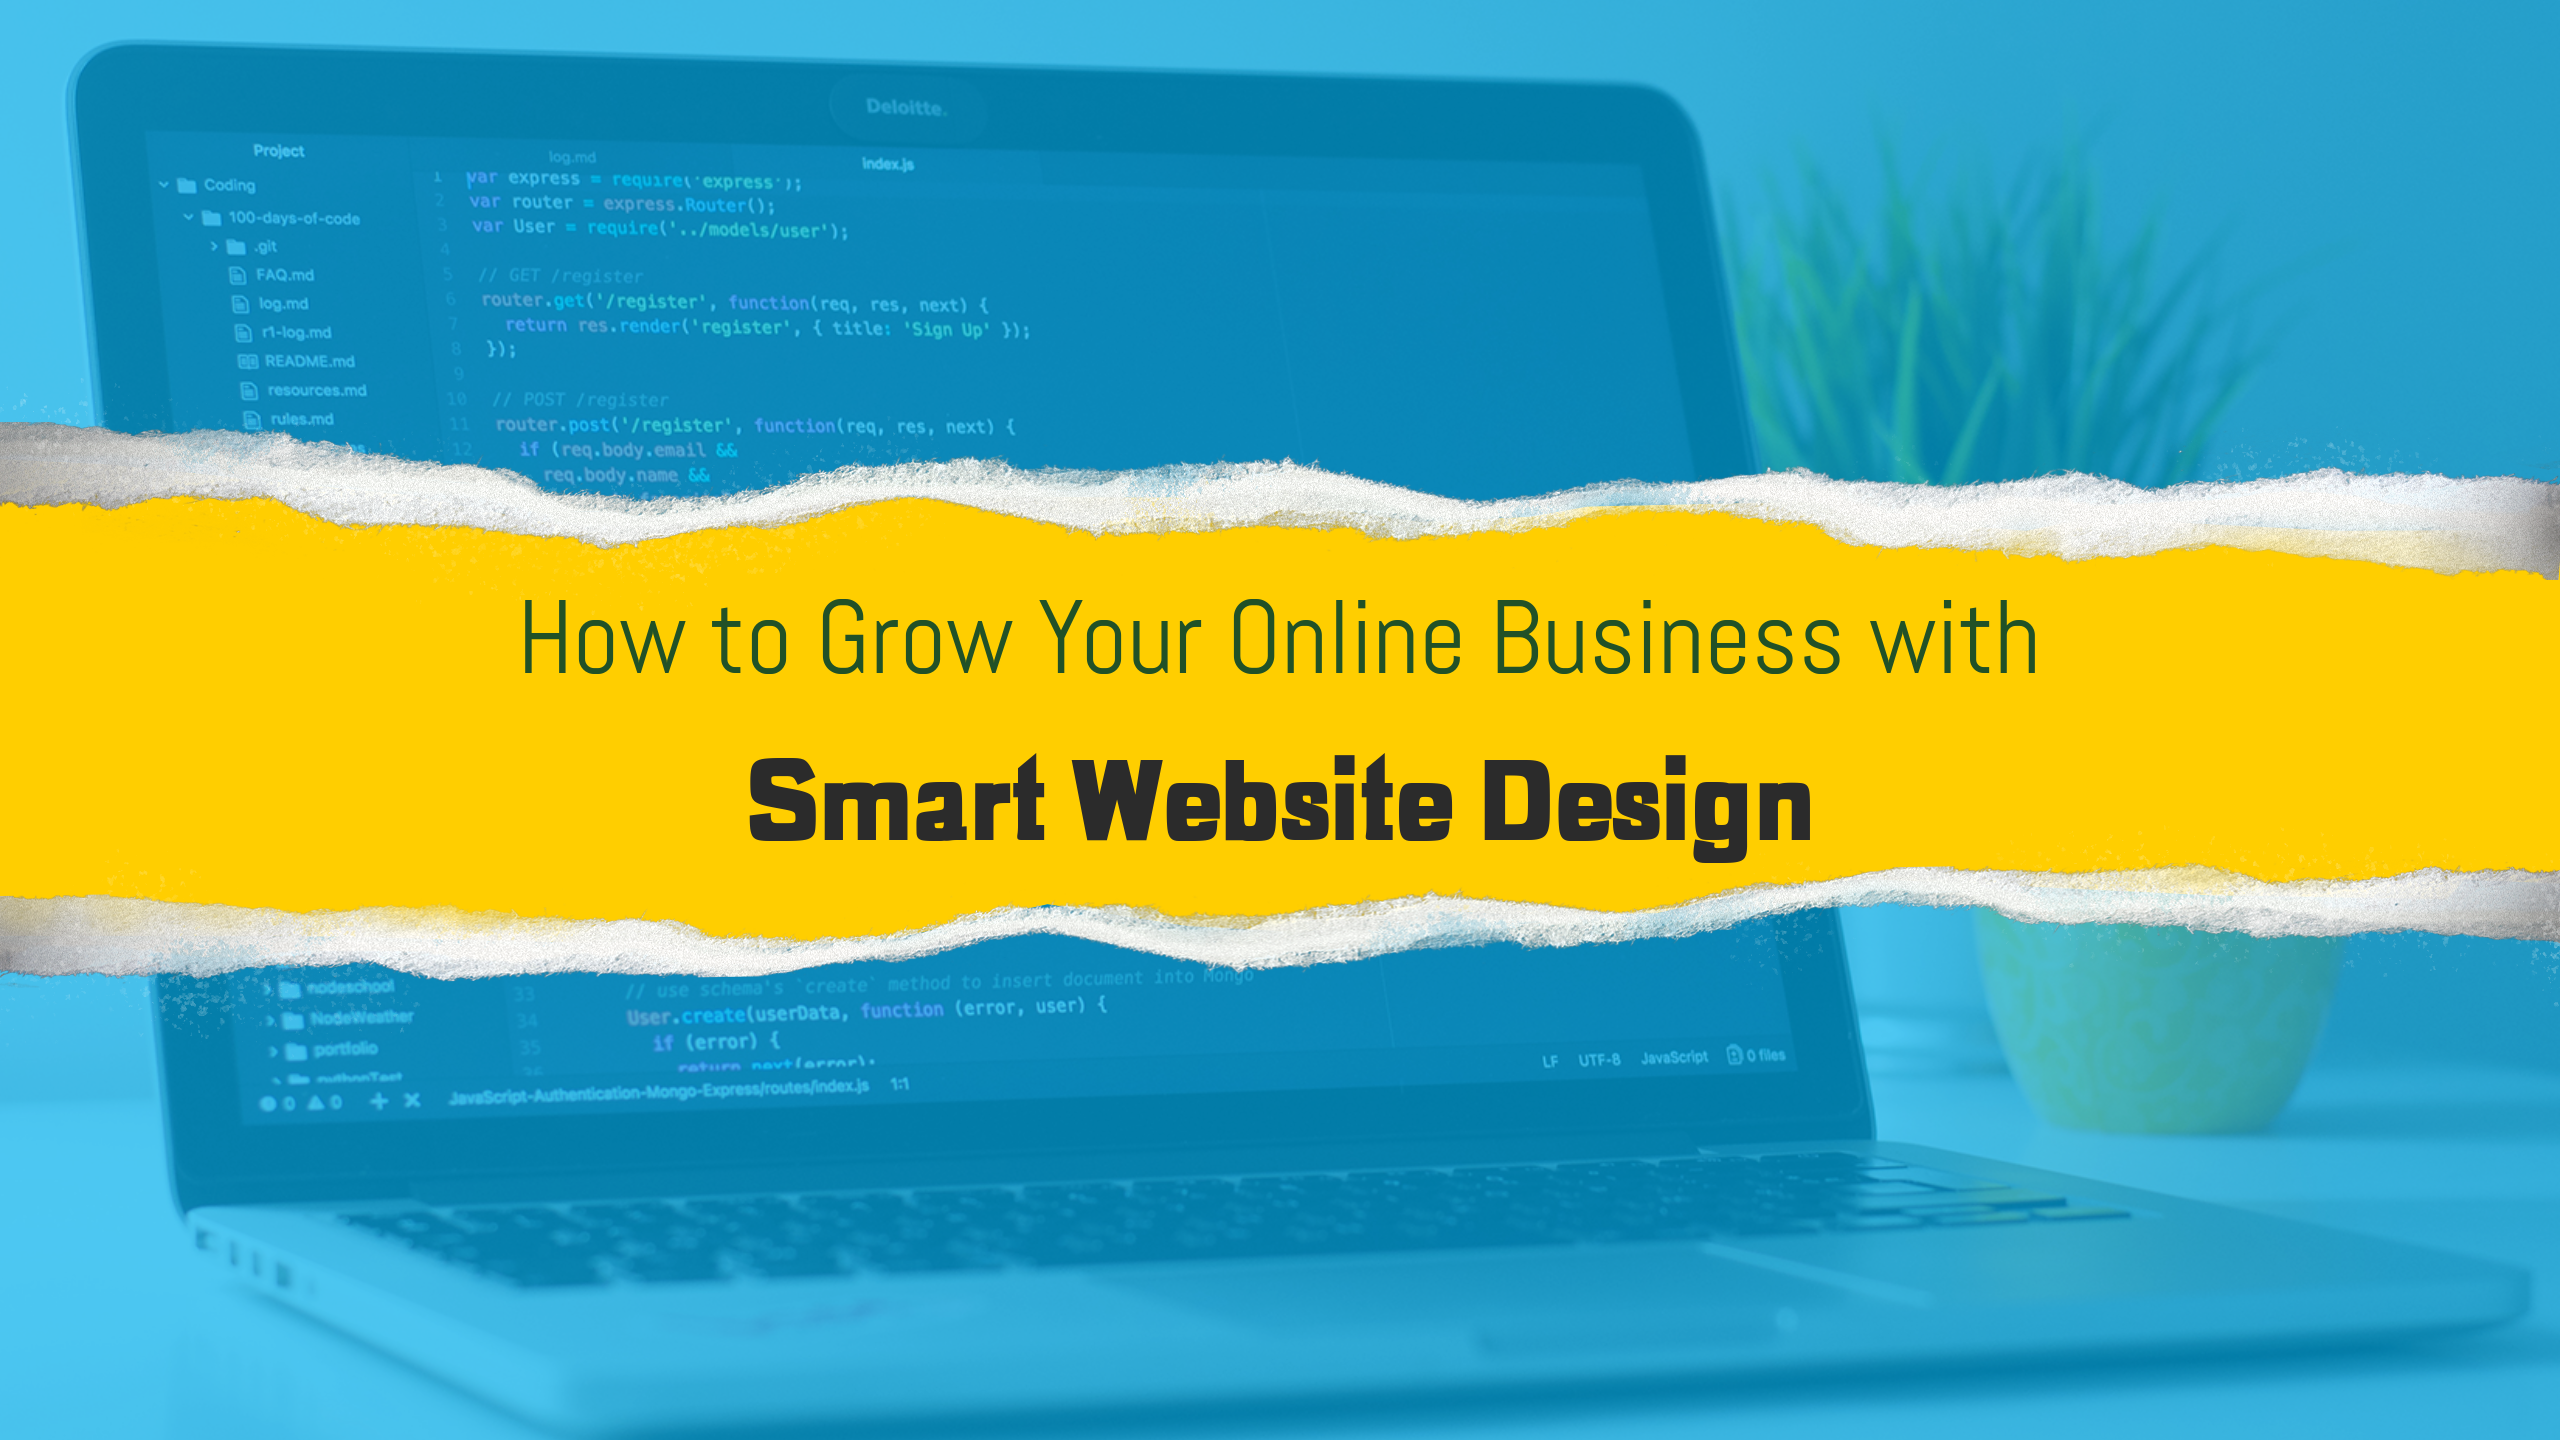 How to Grow Your Online Business With Smart Website Design